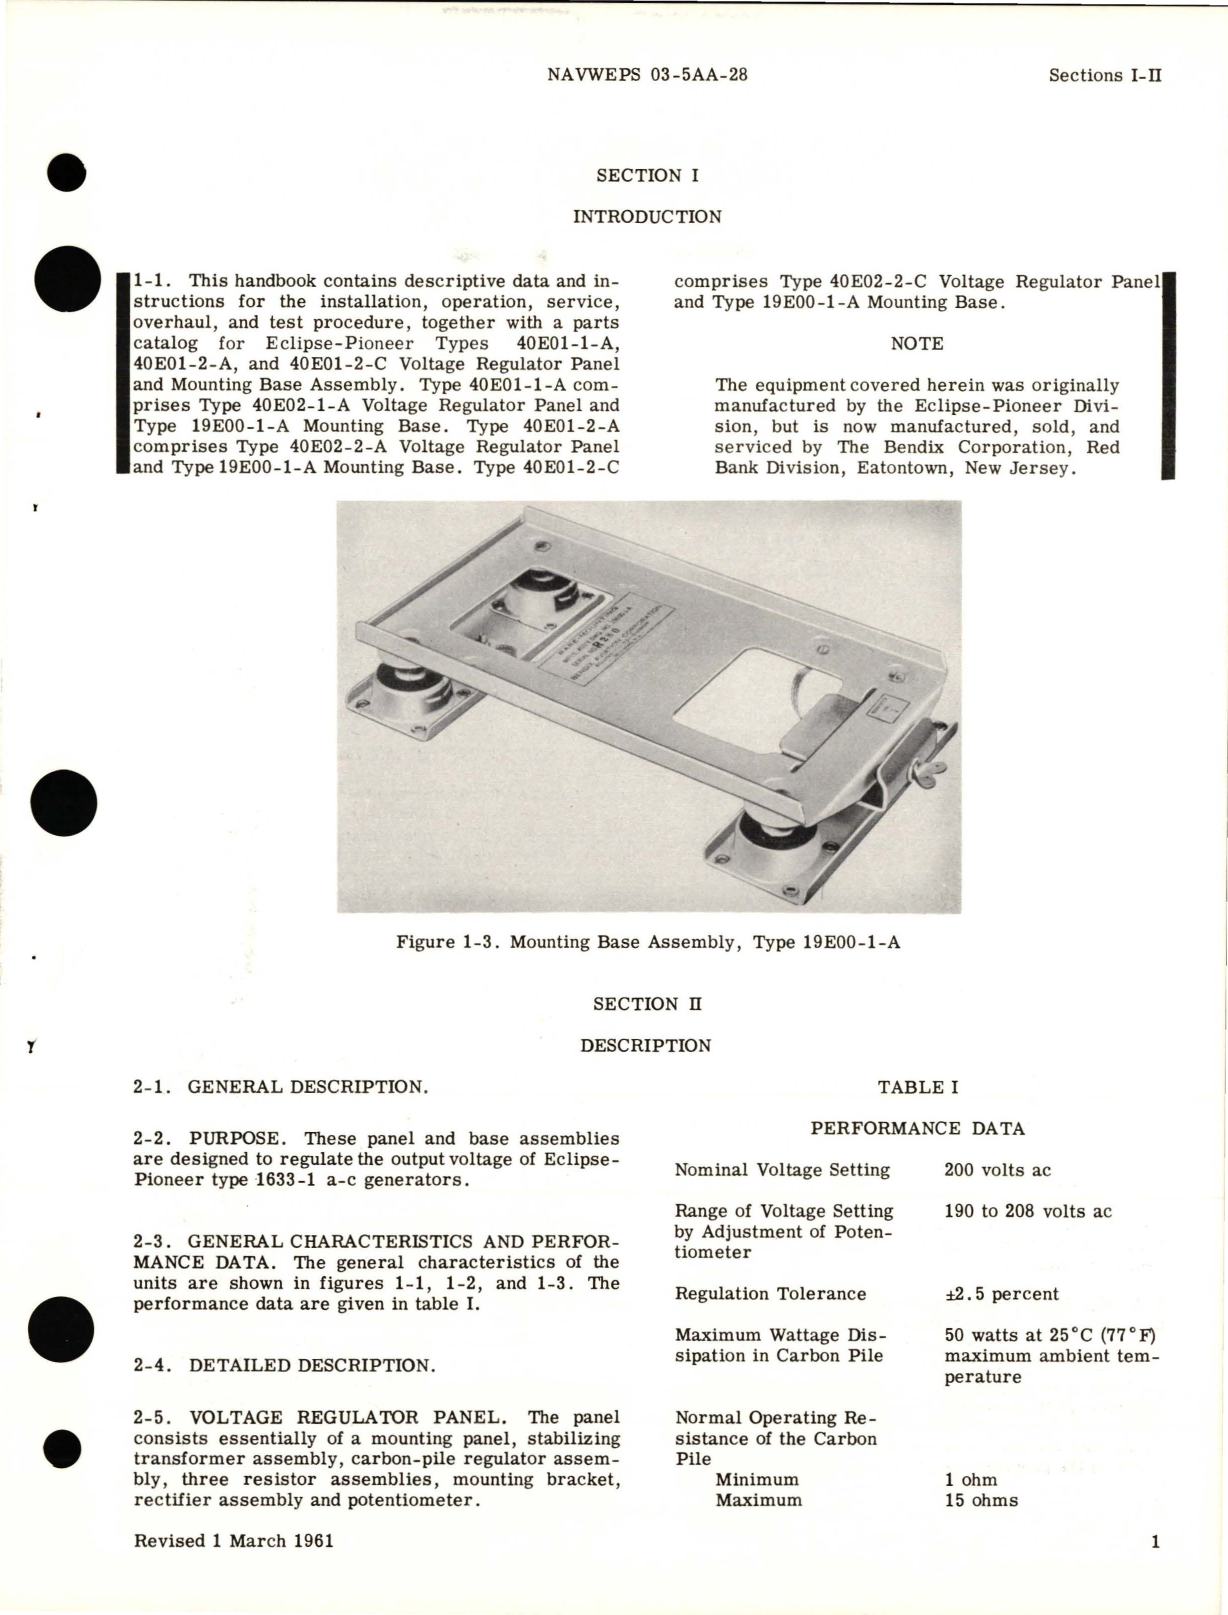 Sample page 5 from AirCorps Library document: Operation, Service, and Overhaul Instructions with Illustrated Parts Breakdown for Voltage Regulator Panel and Mounting Base Assembly 